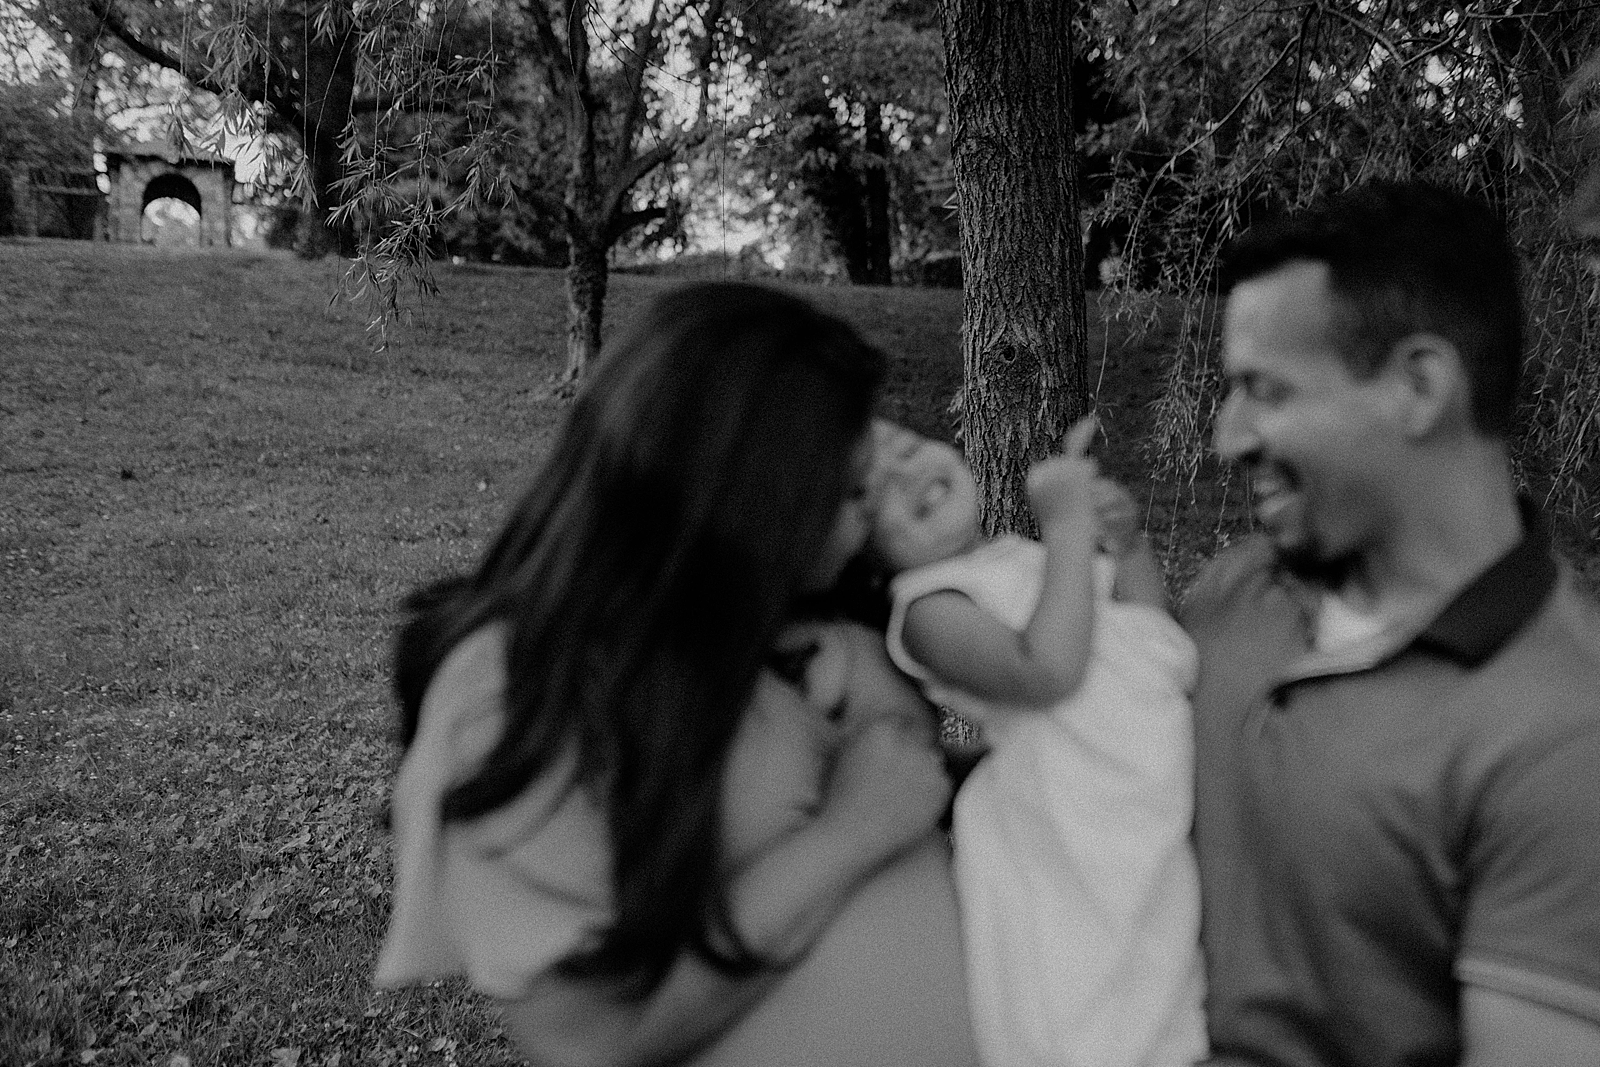 Blurry B&W of Parents holding daughter together